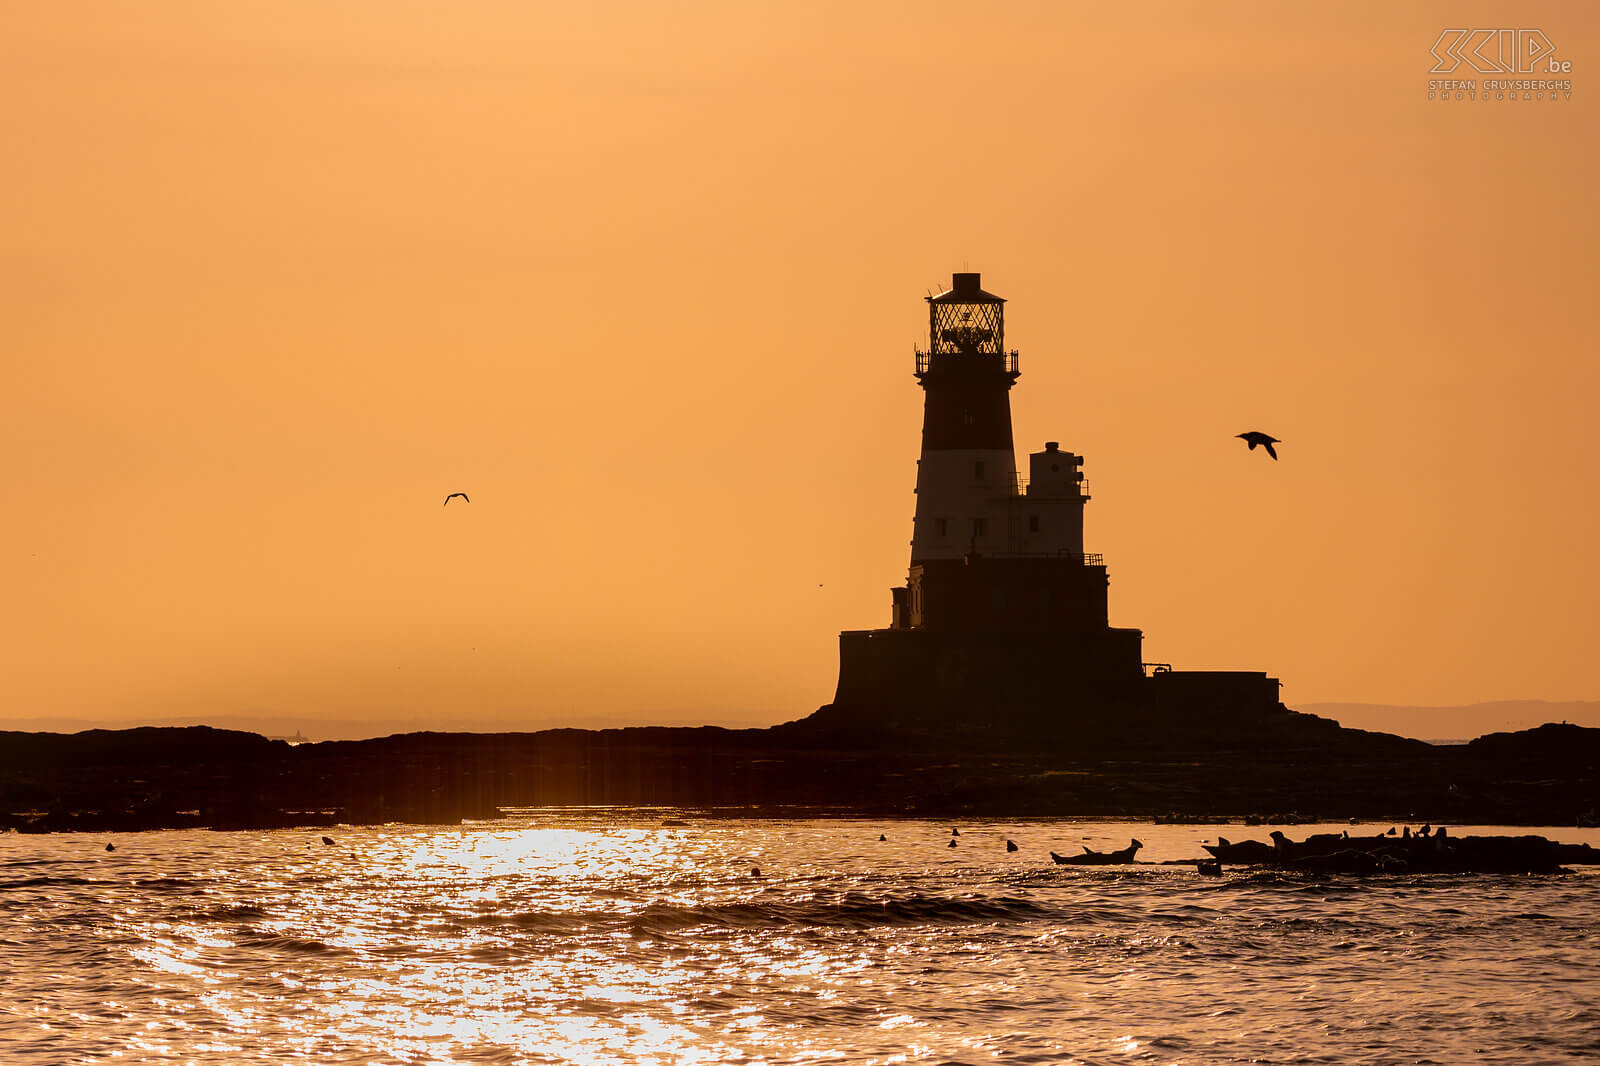 Farne Islands - Sunset at Longstone lighthouse On Longstone Island there is a still working and characteristic red and white lighthouse that was built in 1826. Stefan Cruysberghs